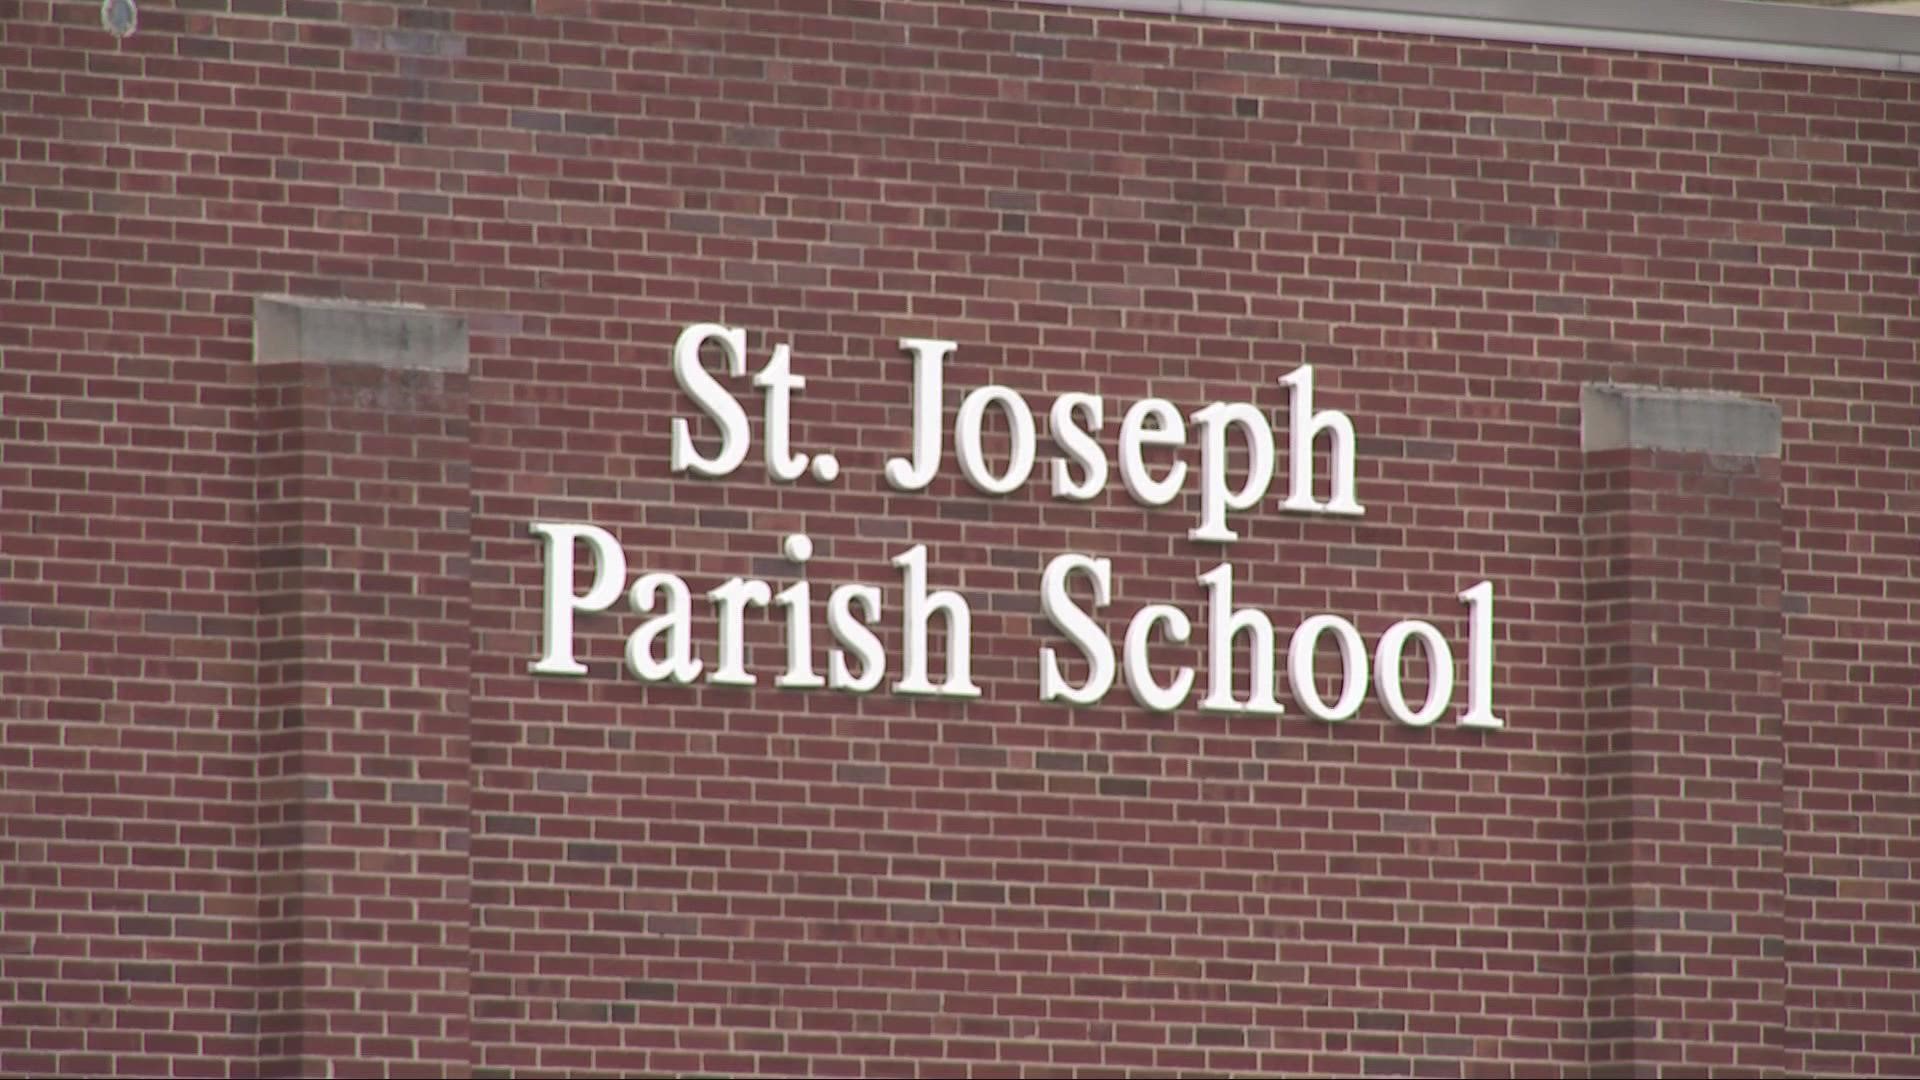 Citing declining enrollment, financial shortfalls, staffing challenges and repairs, the St. Joseph Parish School in Cuyahoga Falls will be closing.